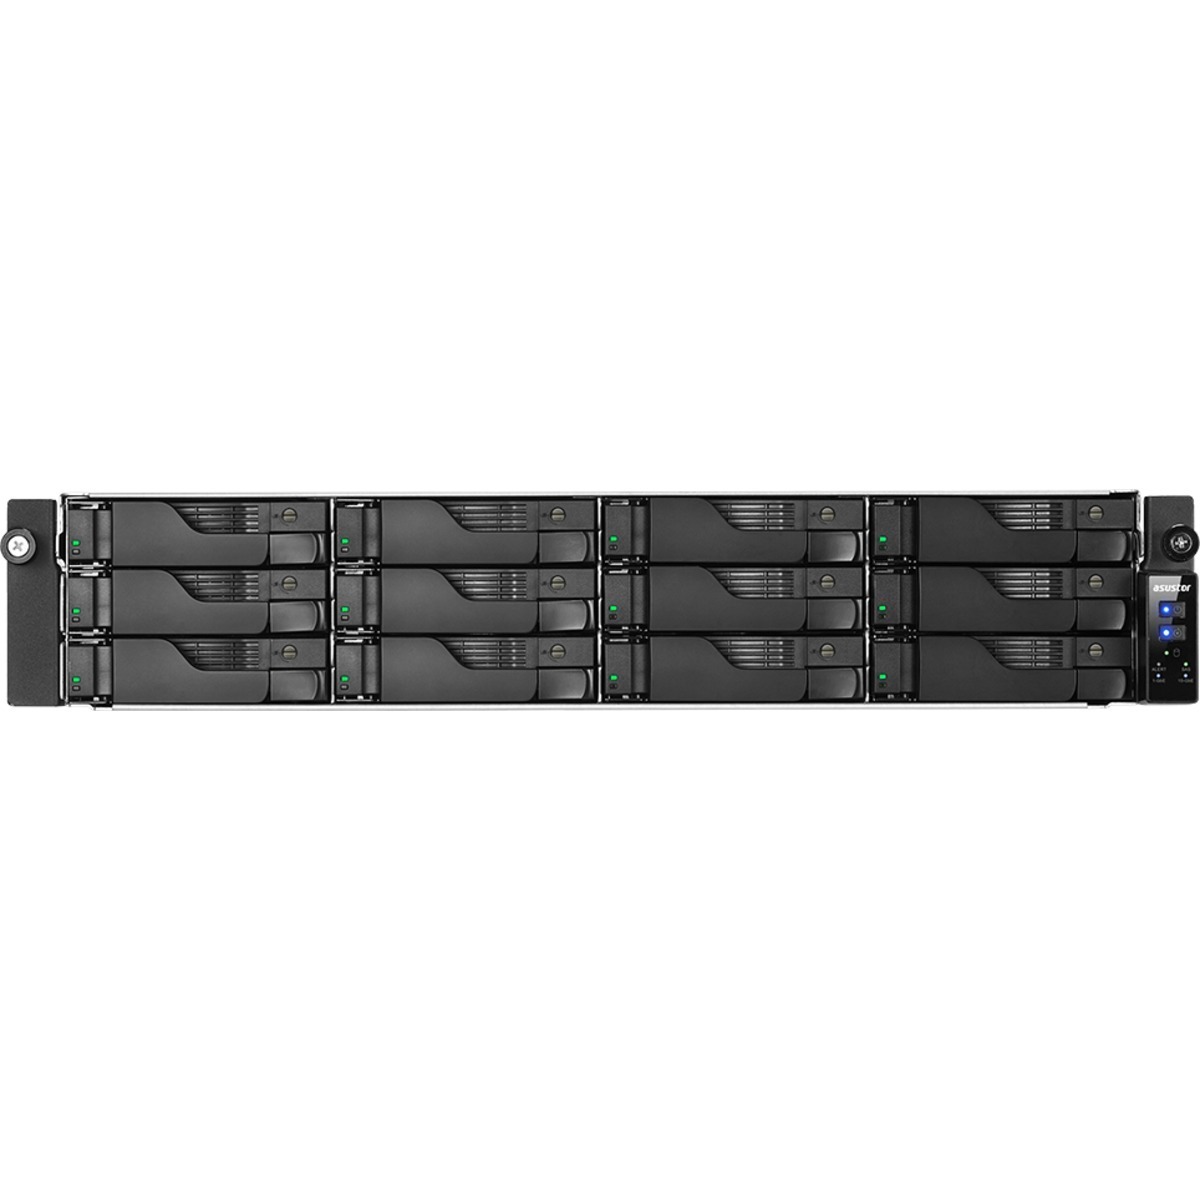 buy $5928 ASUSTOR AS7112RDX Lockerstor 12R Pro 96tb RackMount NAS - Network Attached Storage Device 12x8000gb Seagate BarraCuda ST8000DM004 3.5 5400rpm SATA 6Gb/s HDD CONSUMER Class Drives Installed - Burn-In Tested - nas headquarters buy network attached storage server device das new raid-5 free shipping usa christmas new year holiday sale AS7112RDX Lockerstor 12R Pro